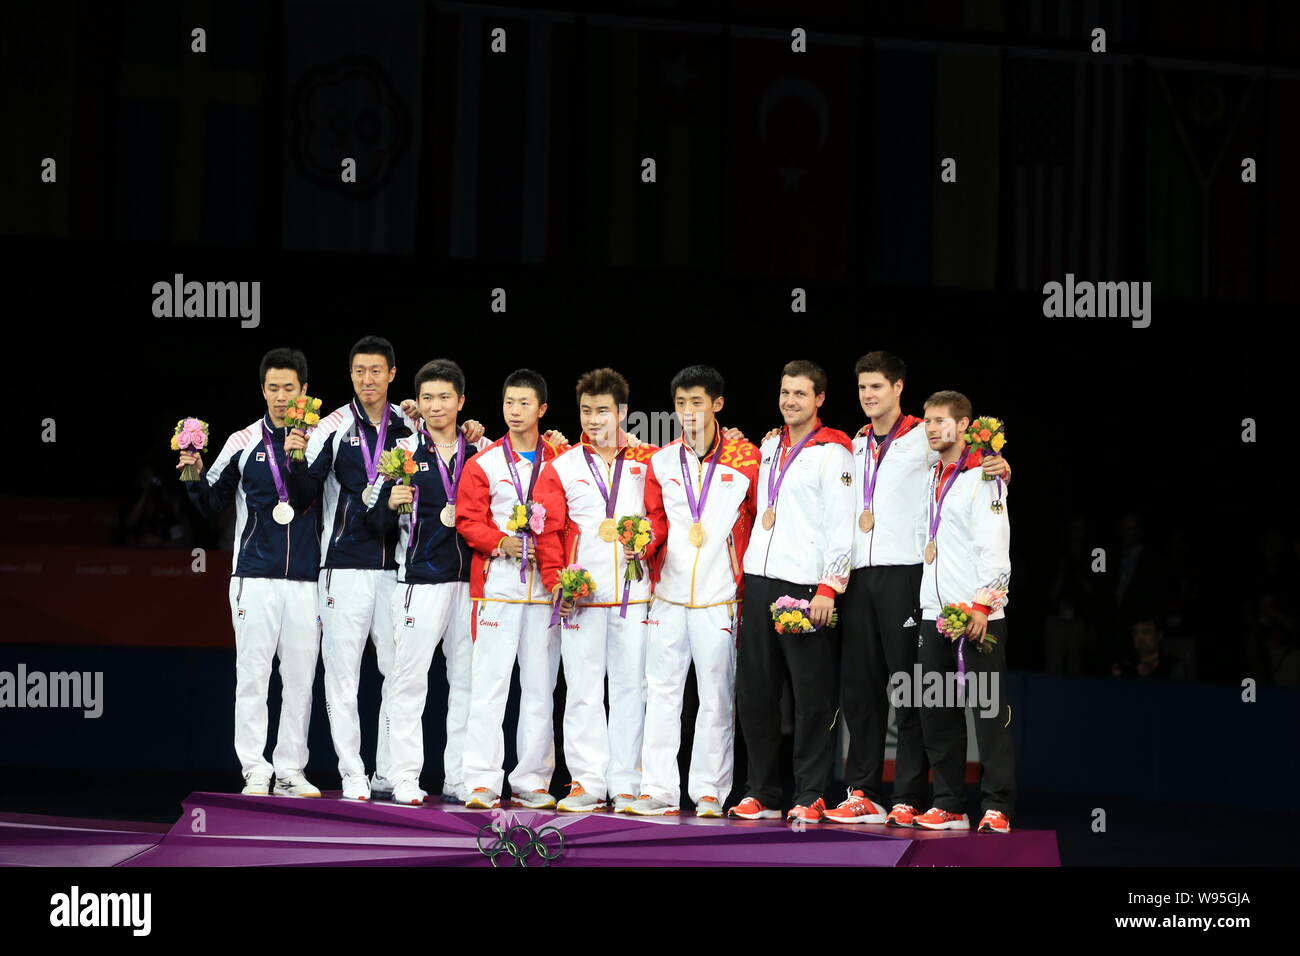 (From left to right) Silver medalists of South Korea, gold medalists of China and bronze medalists of Germany pose on the podium in the award ceremony Stock Photo